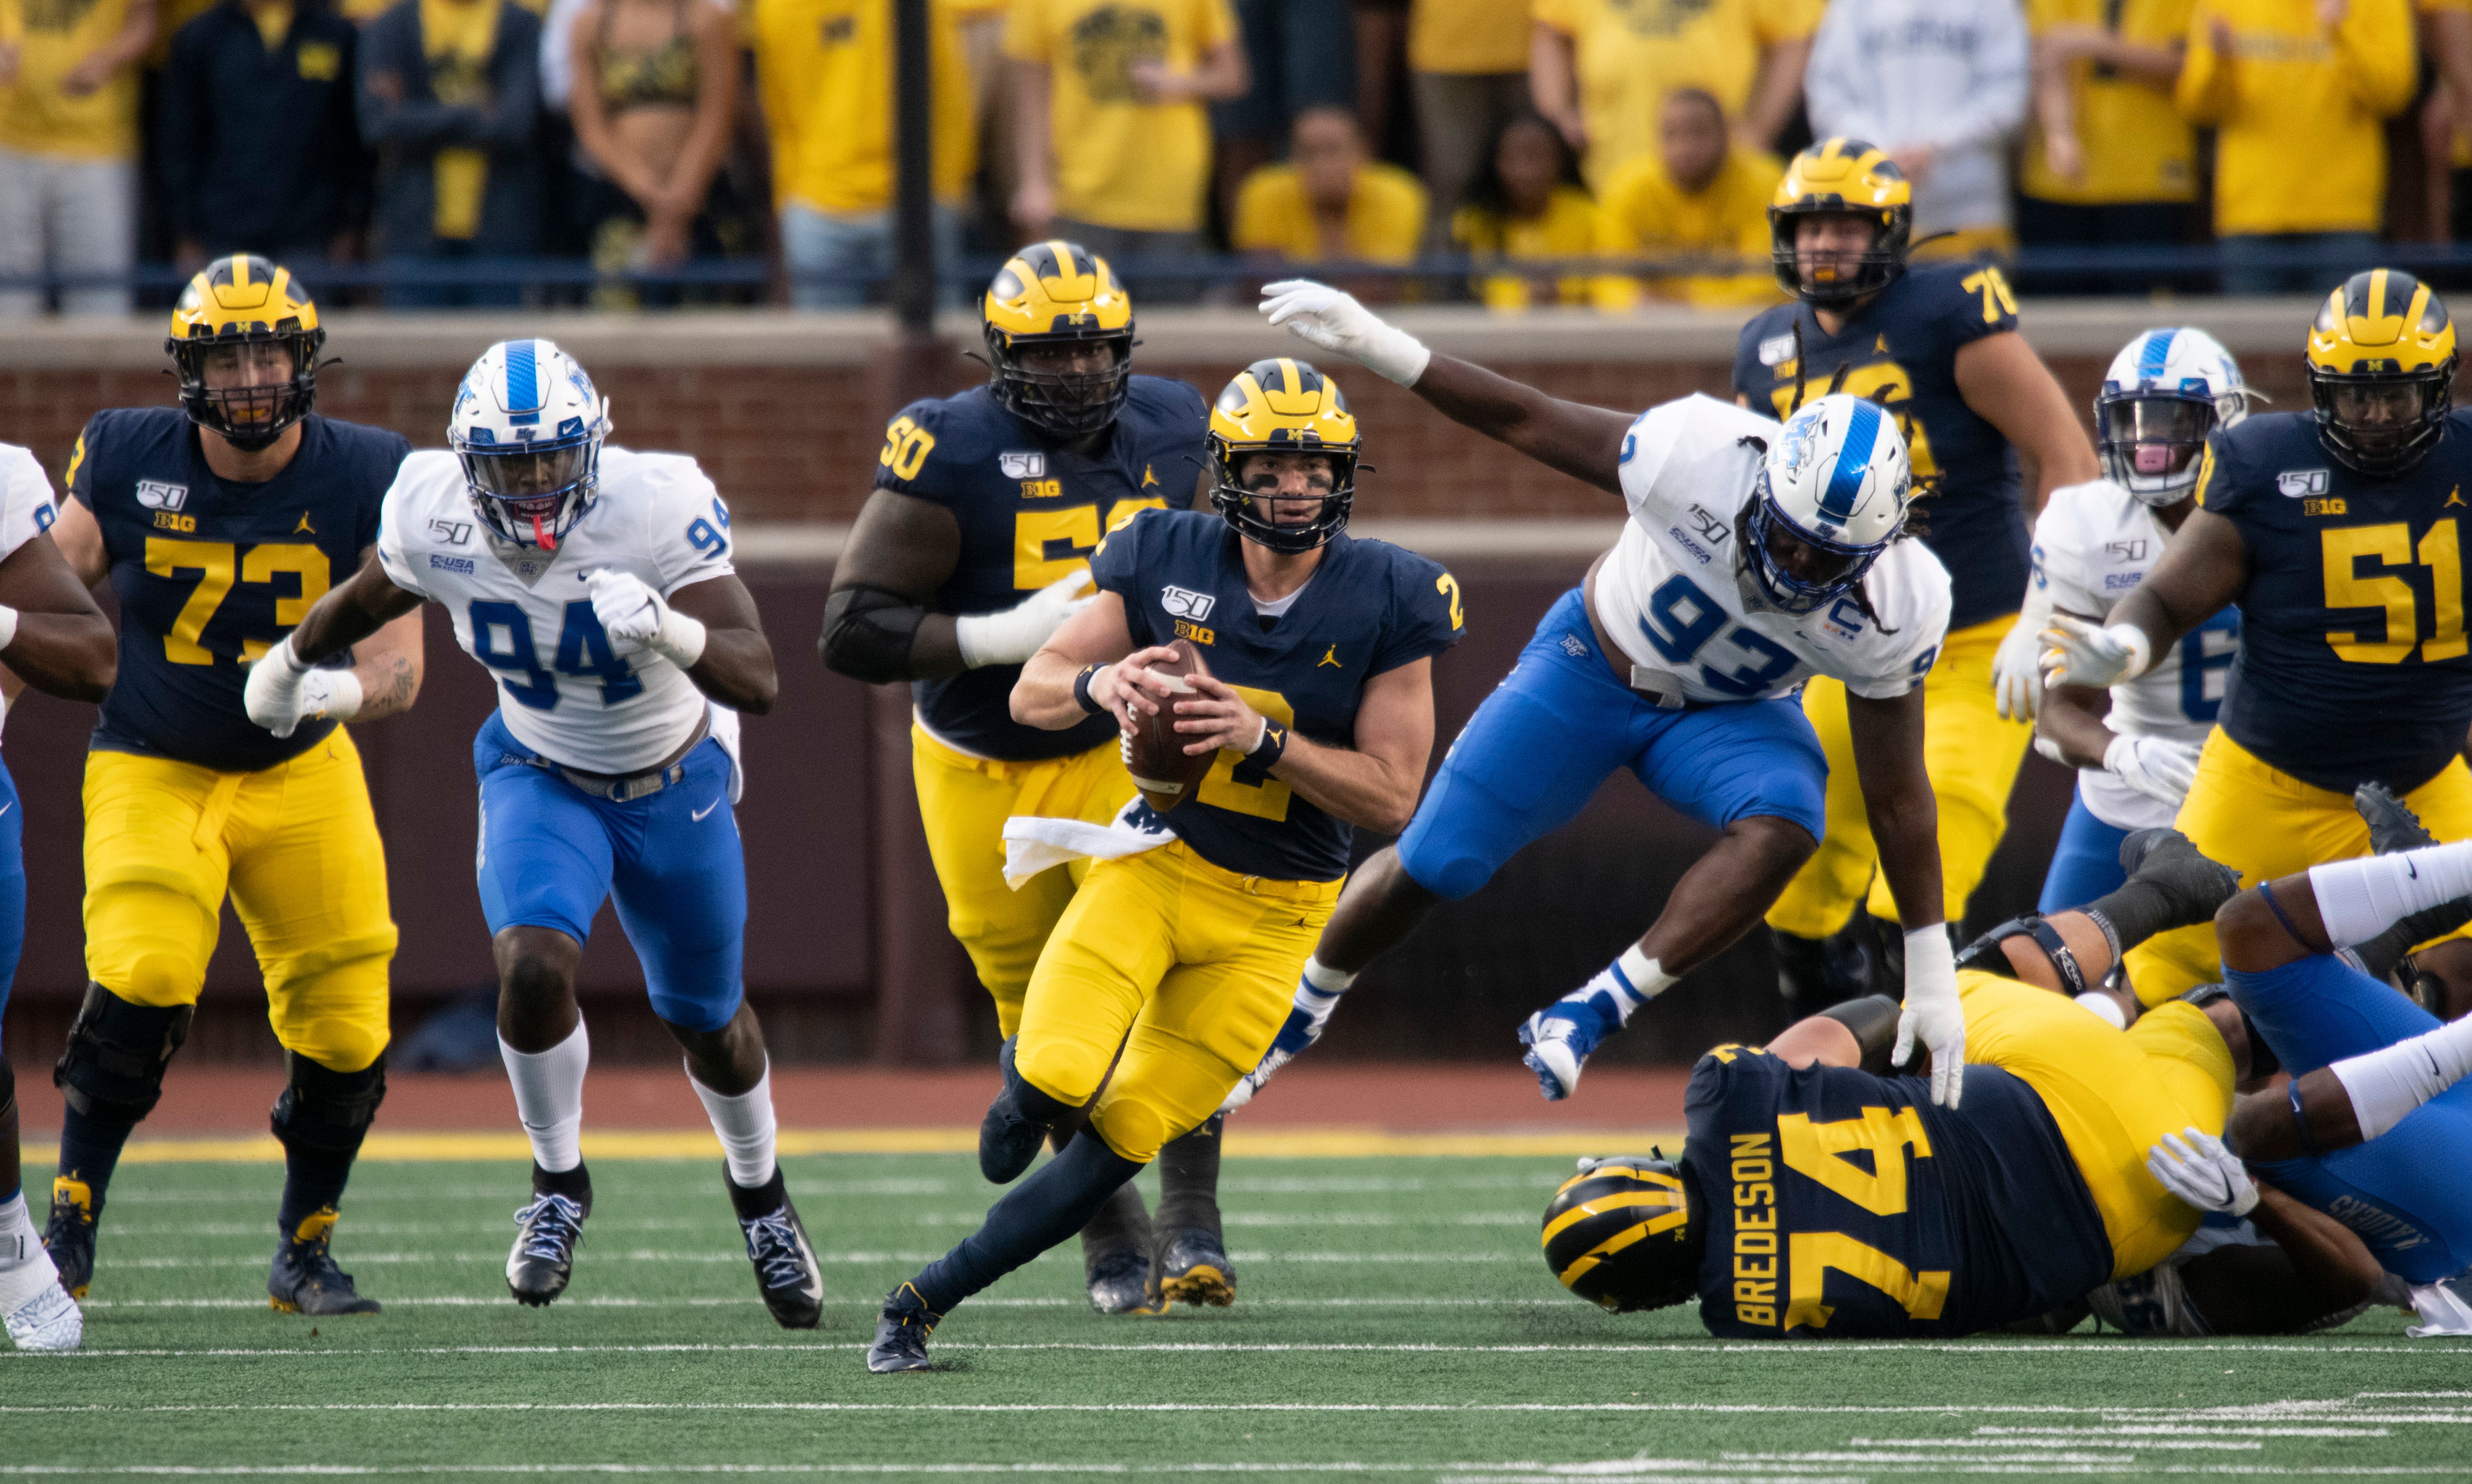 Michigan quarterback Shea Patterson runs the ball up the middle on the first play from scrimmage, but fumbles the ball away on the play in the first quarter.